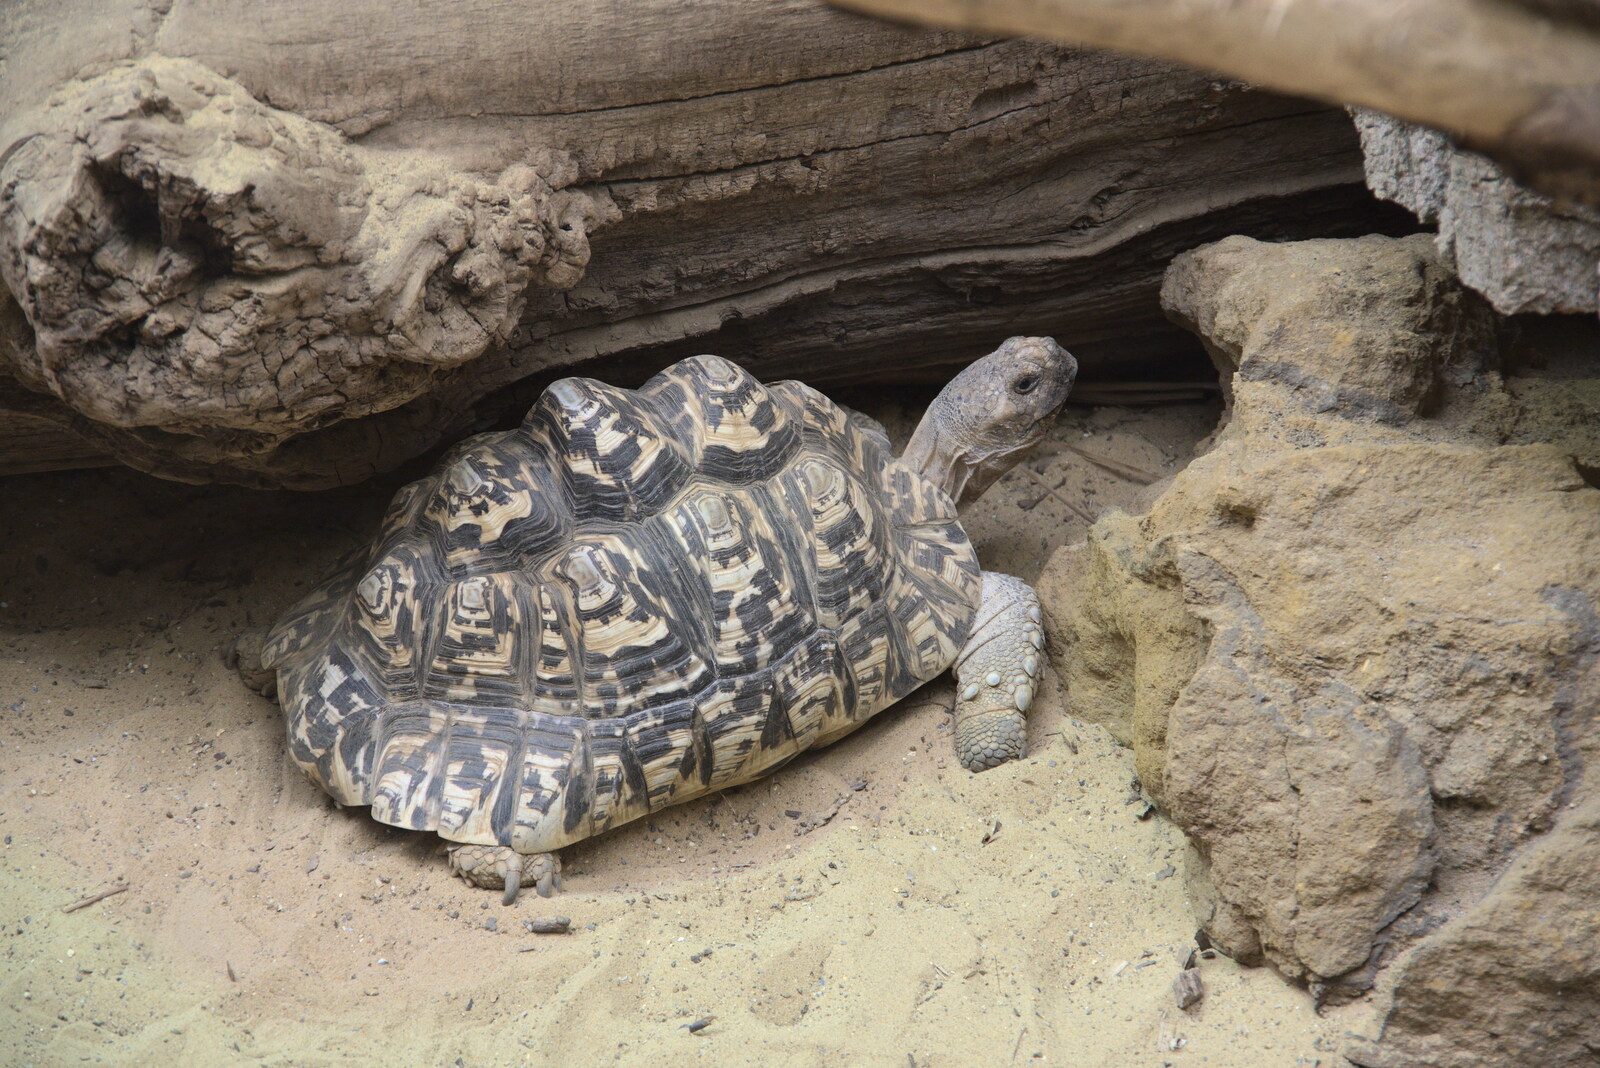 A tortoise trundles around from A Moth Infestation and a Trip to the Zoo, Banham, Norfolk - 21st May 2022